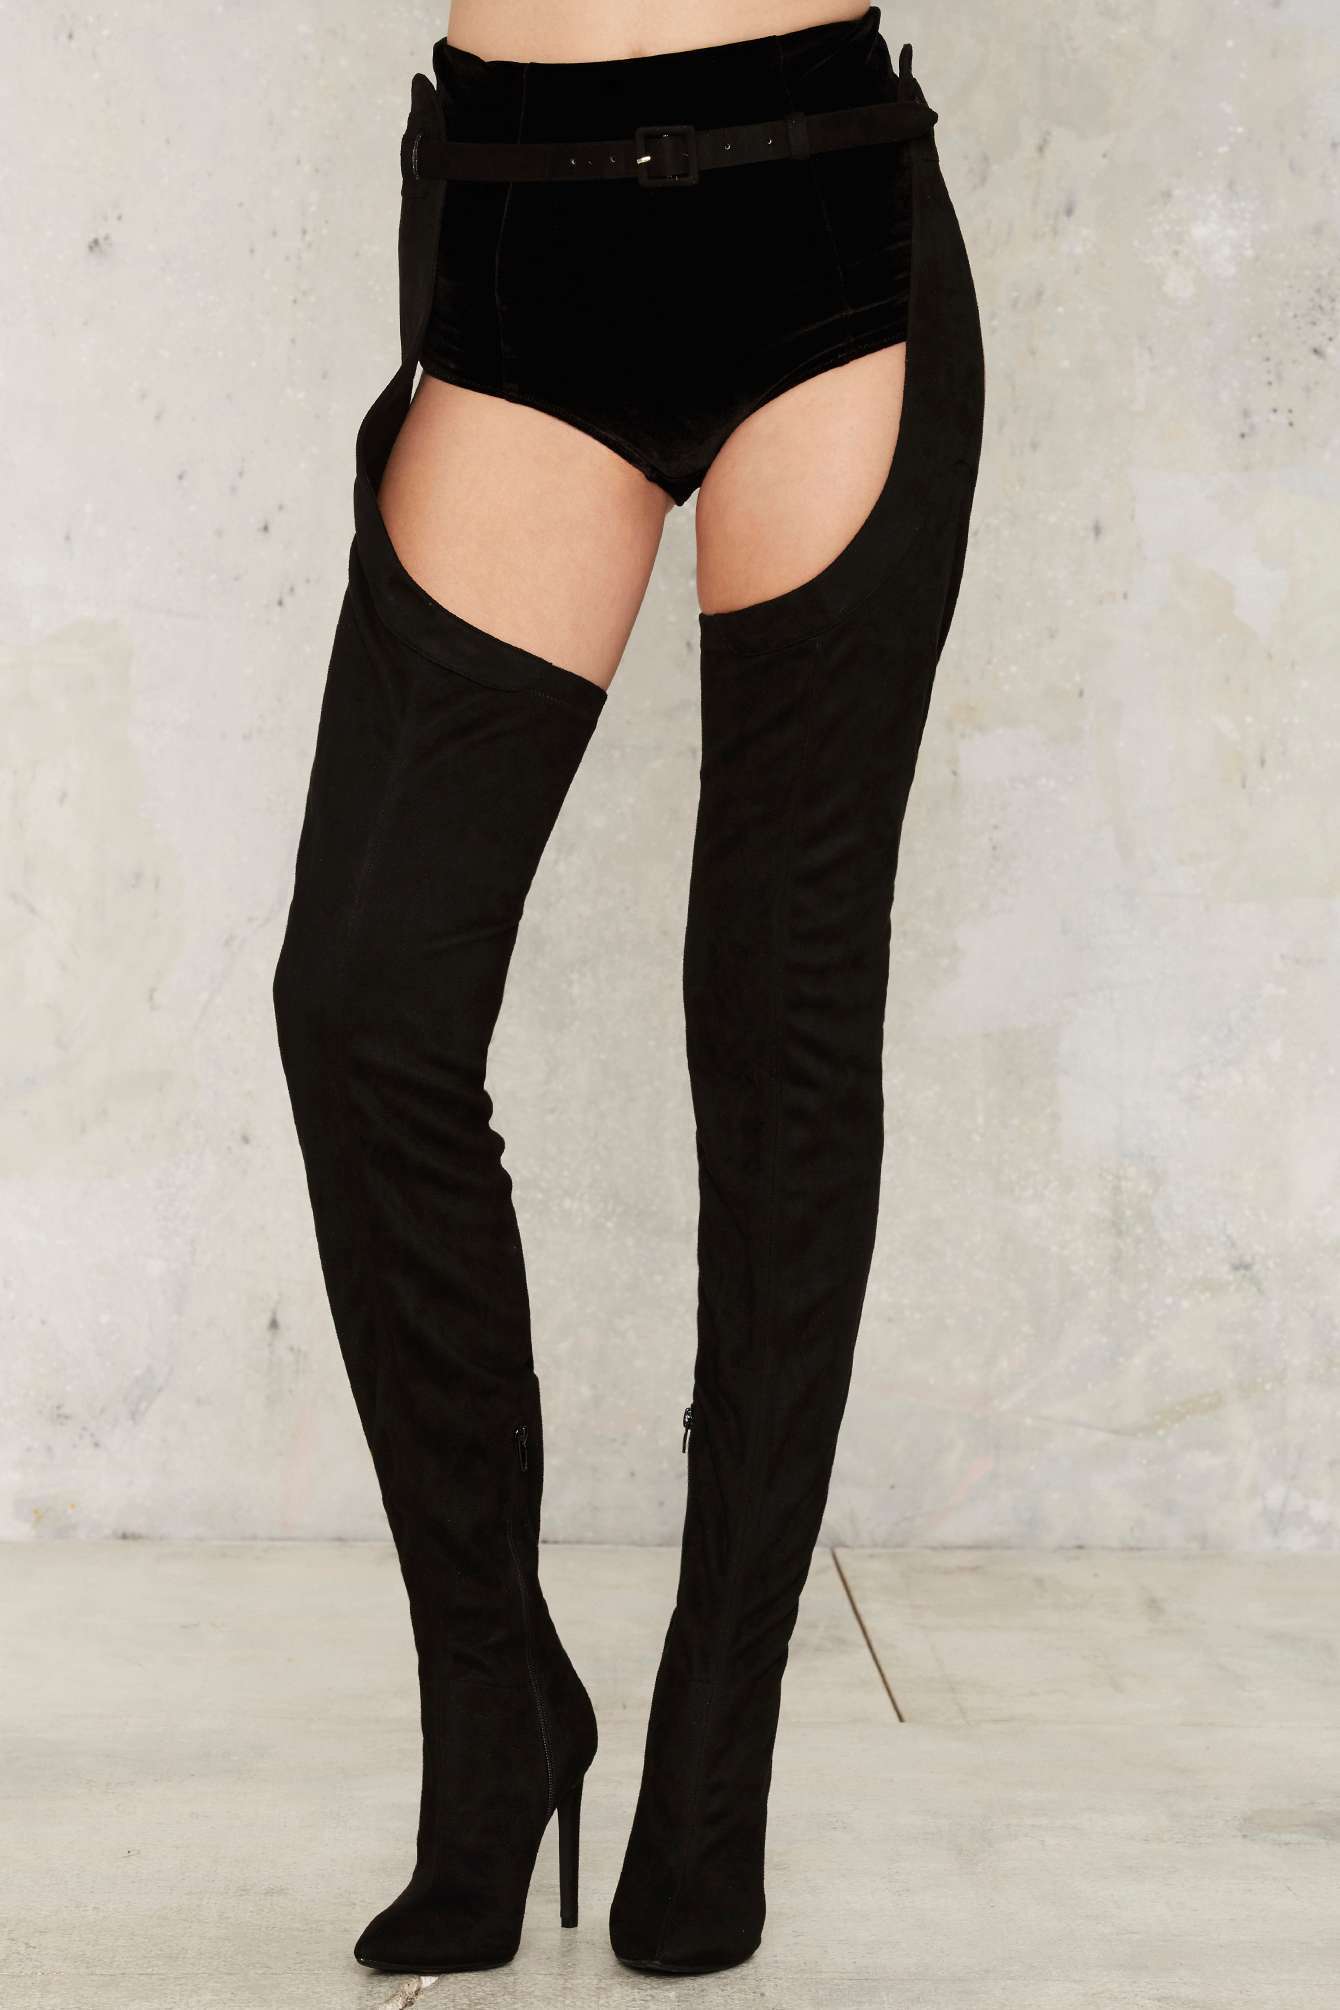 thigh high boots with attached belt